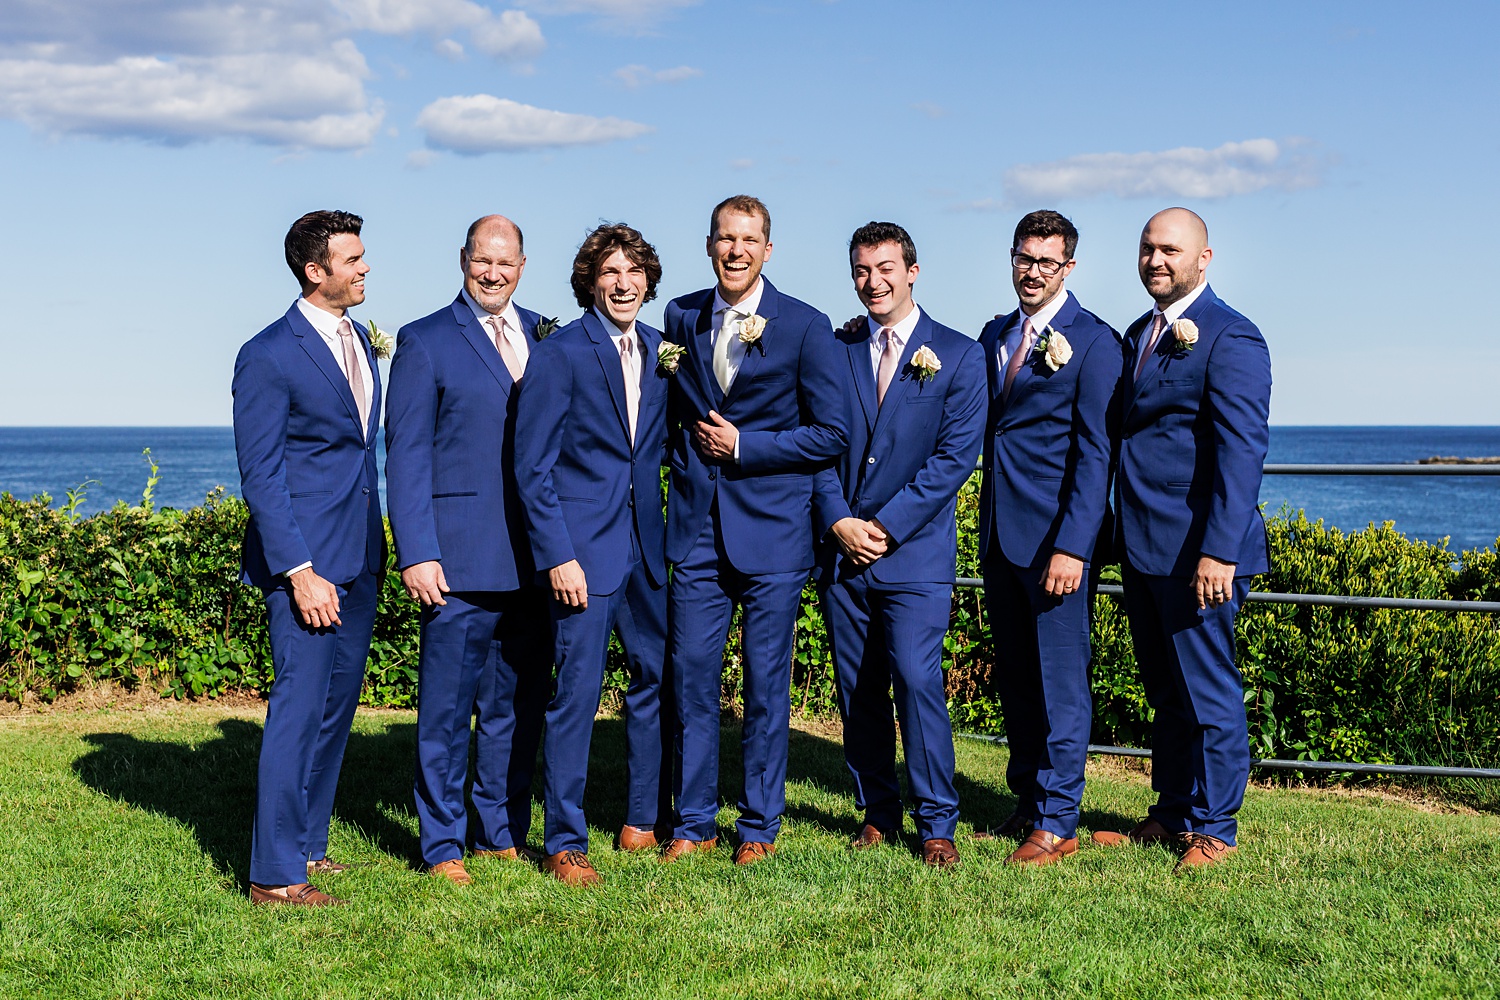 The groom and the groomsmen on the wedding day share a laugh